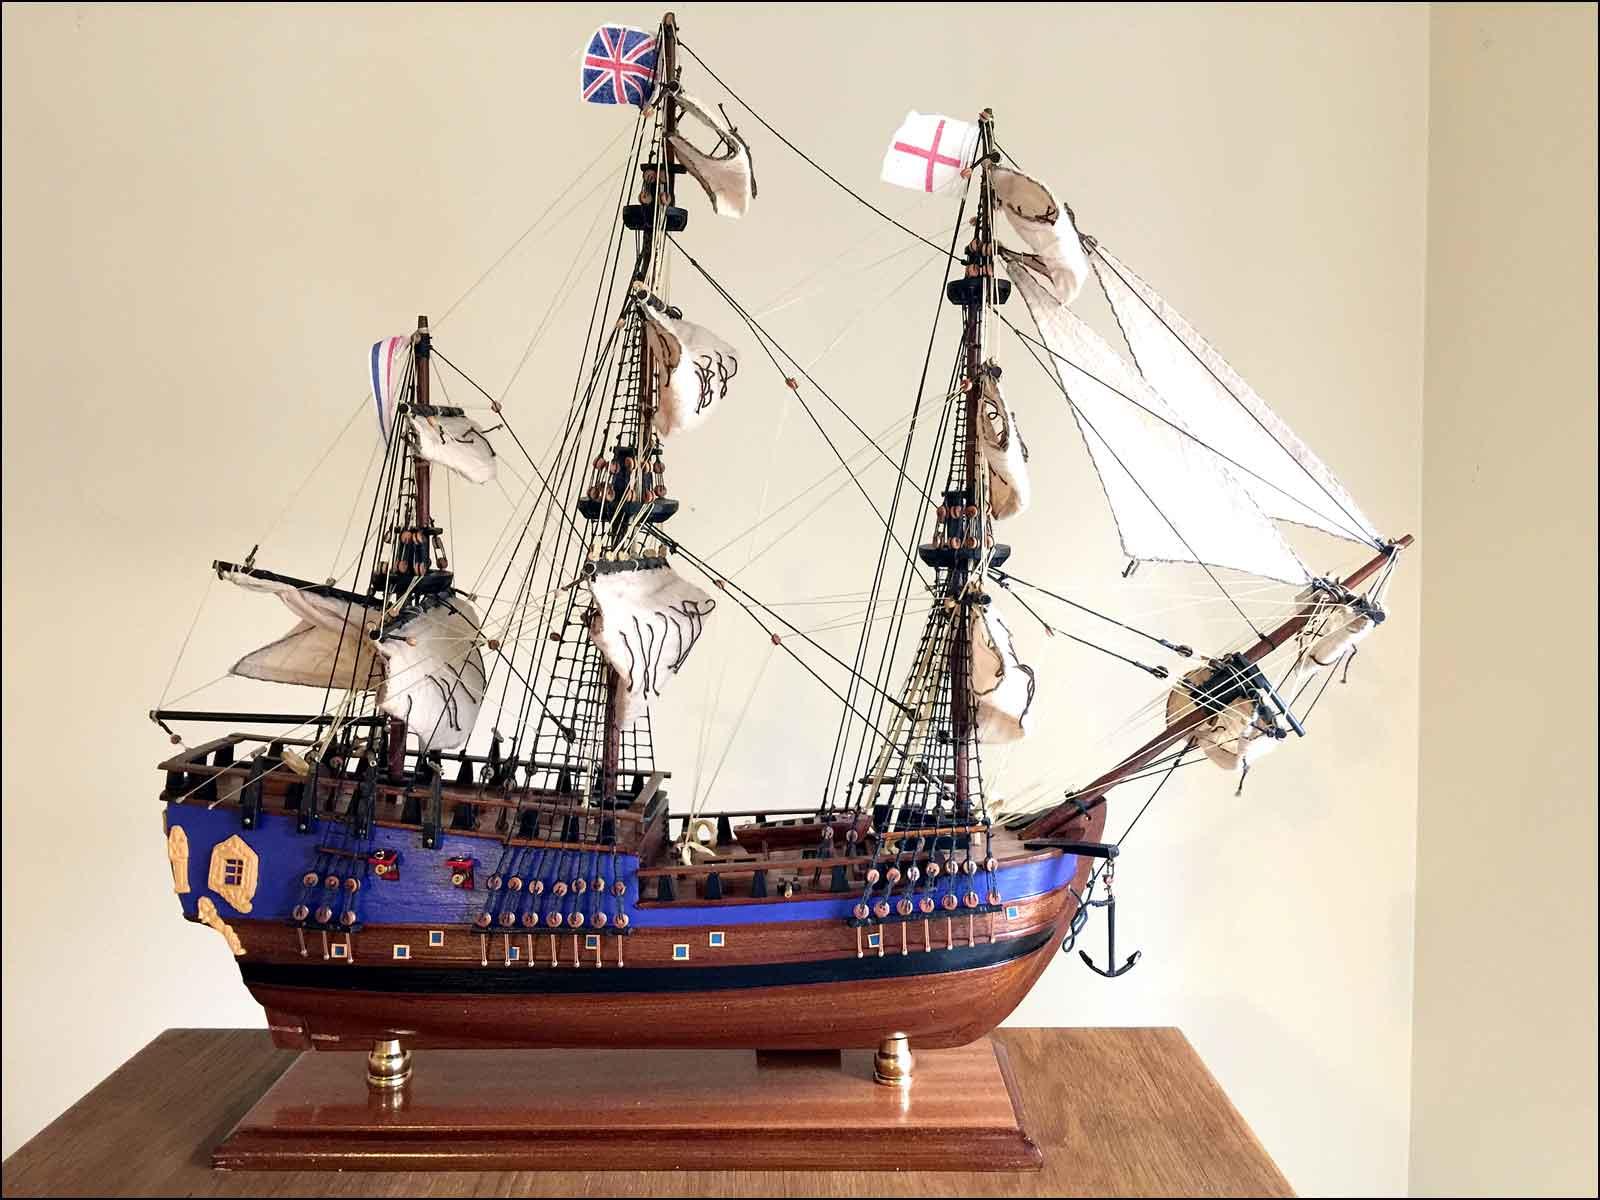 completed model of Cook's Endeavour